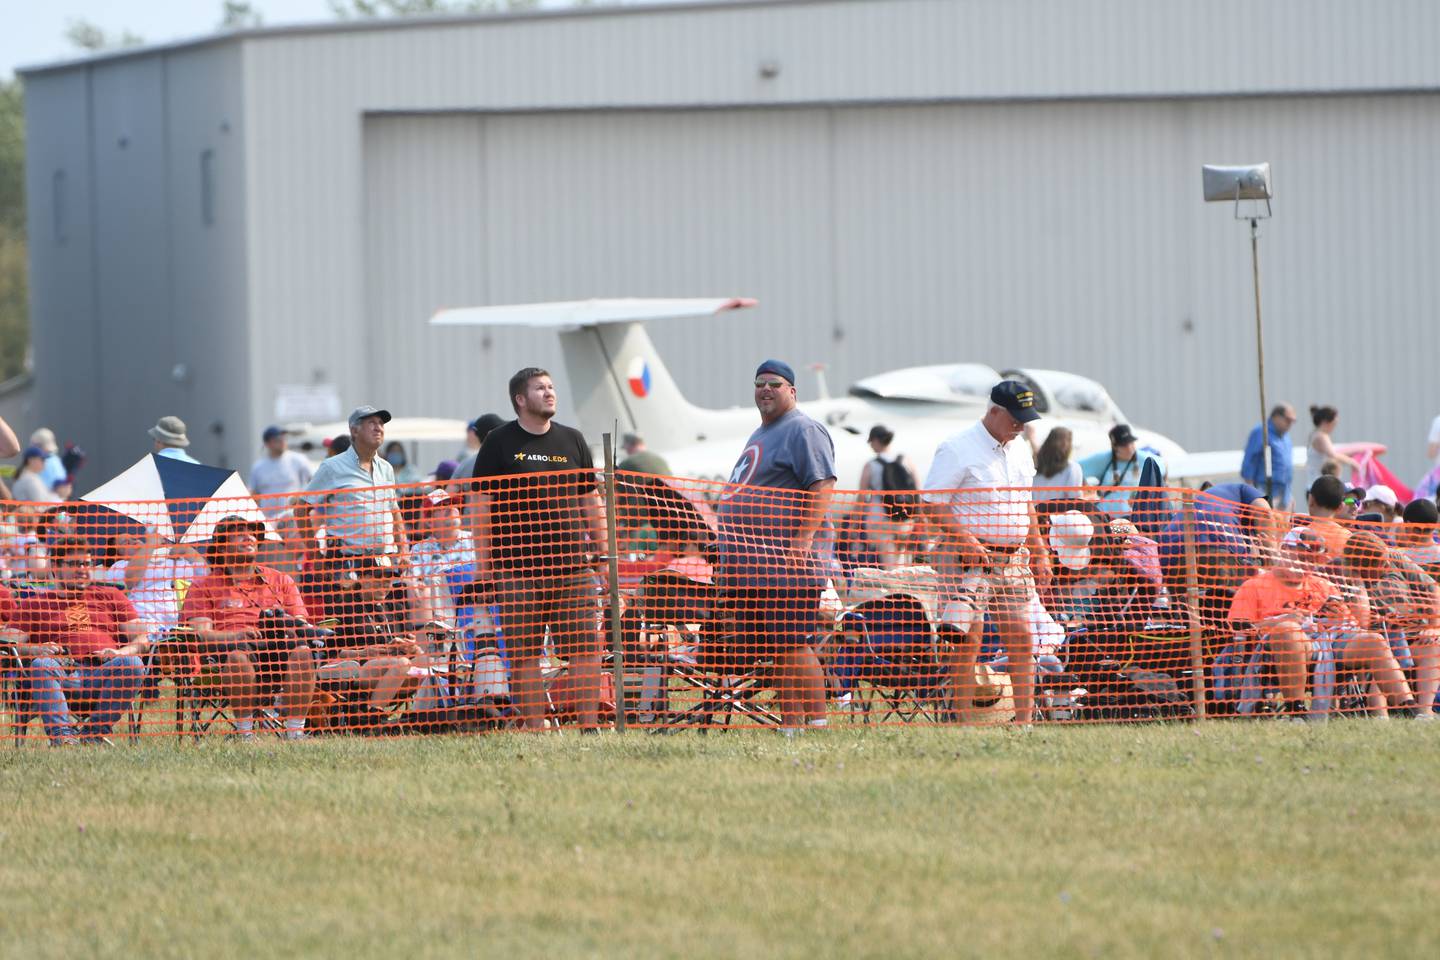 Big crowds turned out in 2021 for the Northern Illinois Air Show, previously called Wings over Waukegan. The show did not take place in 2022.